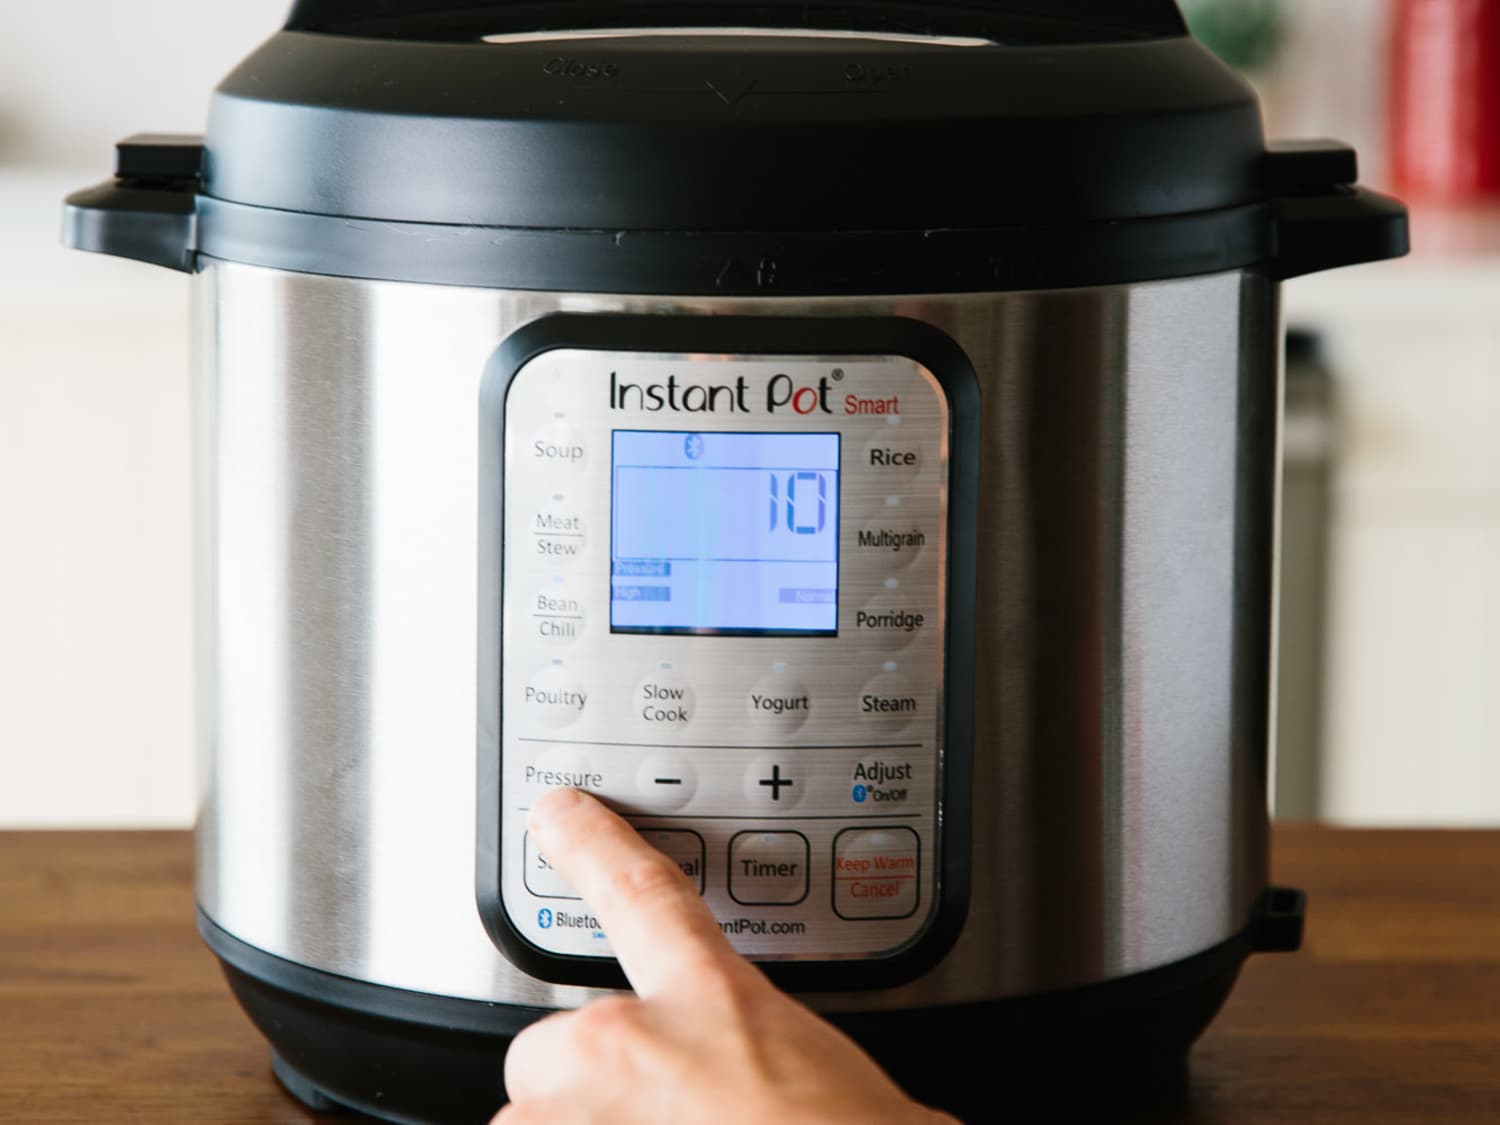 What Is High Pressure In The Electric Pressure Cooker?